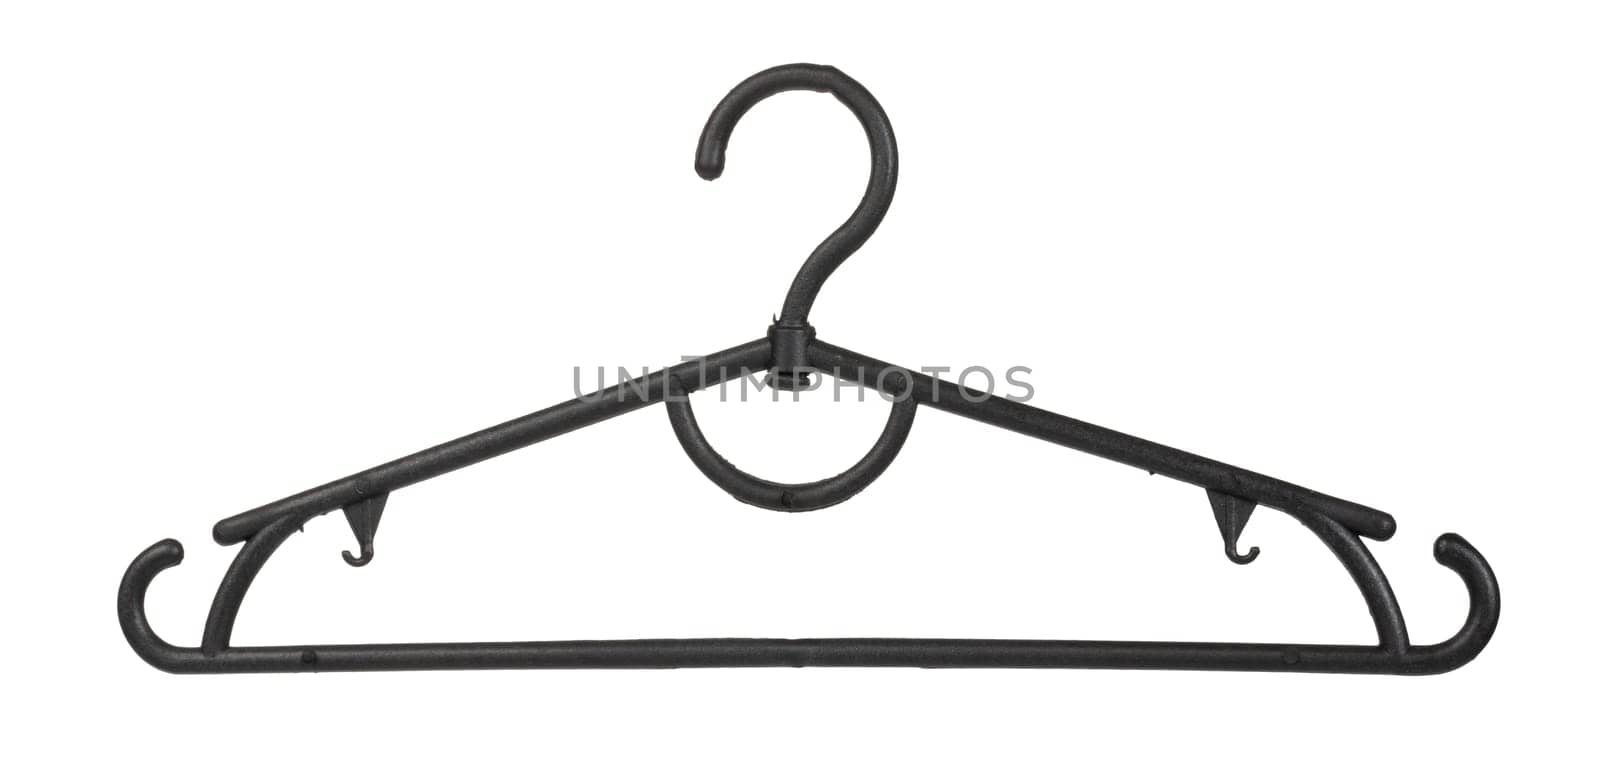 Clothes wooden hanger isolated on white background by Fabrikasimf